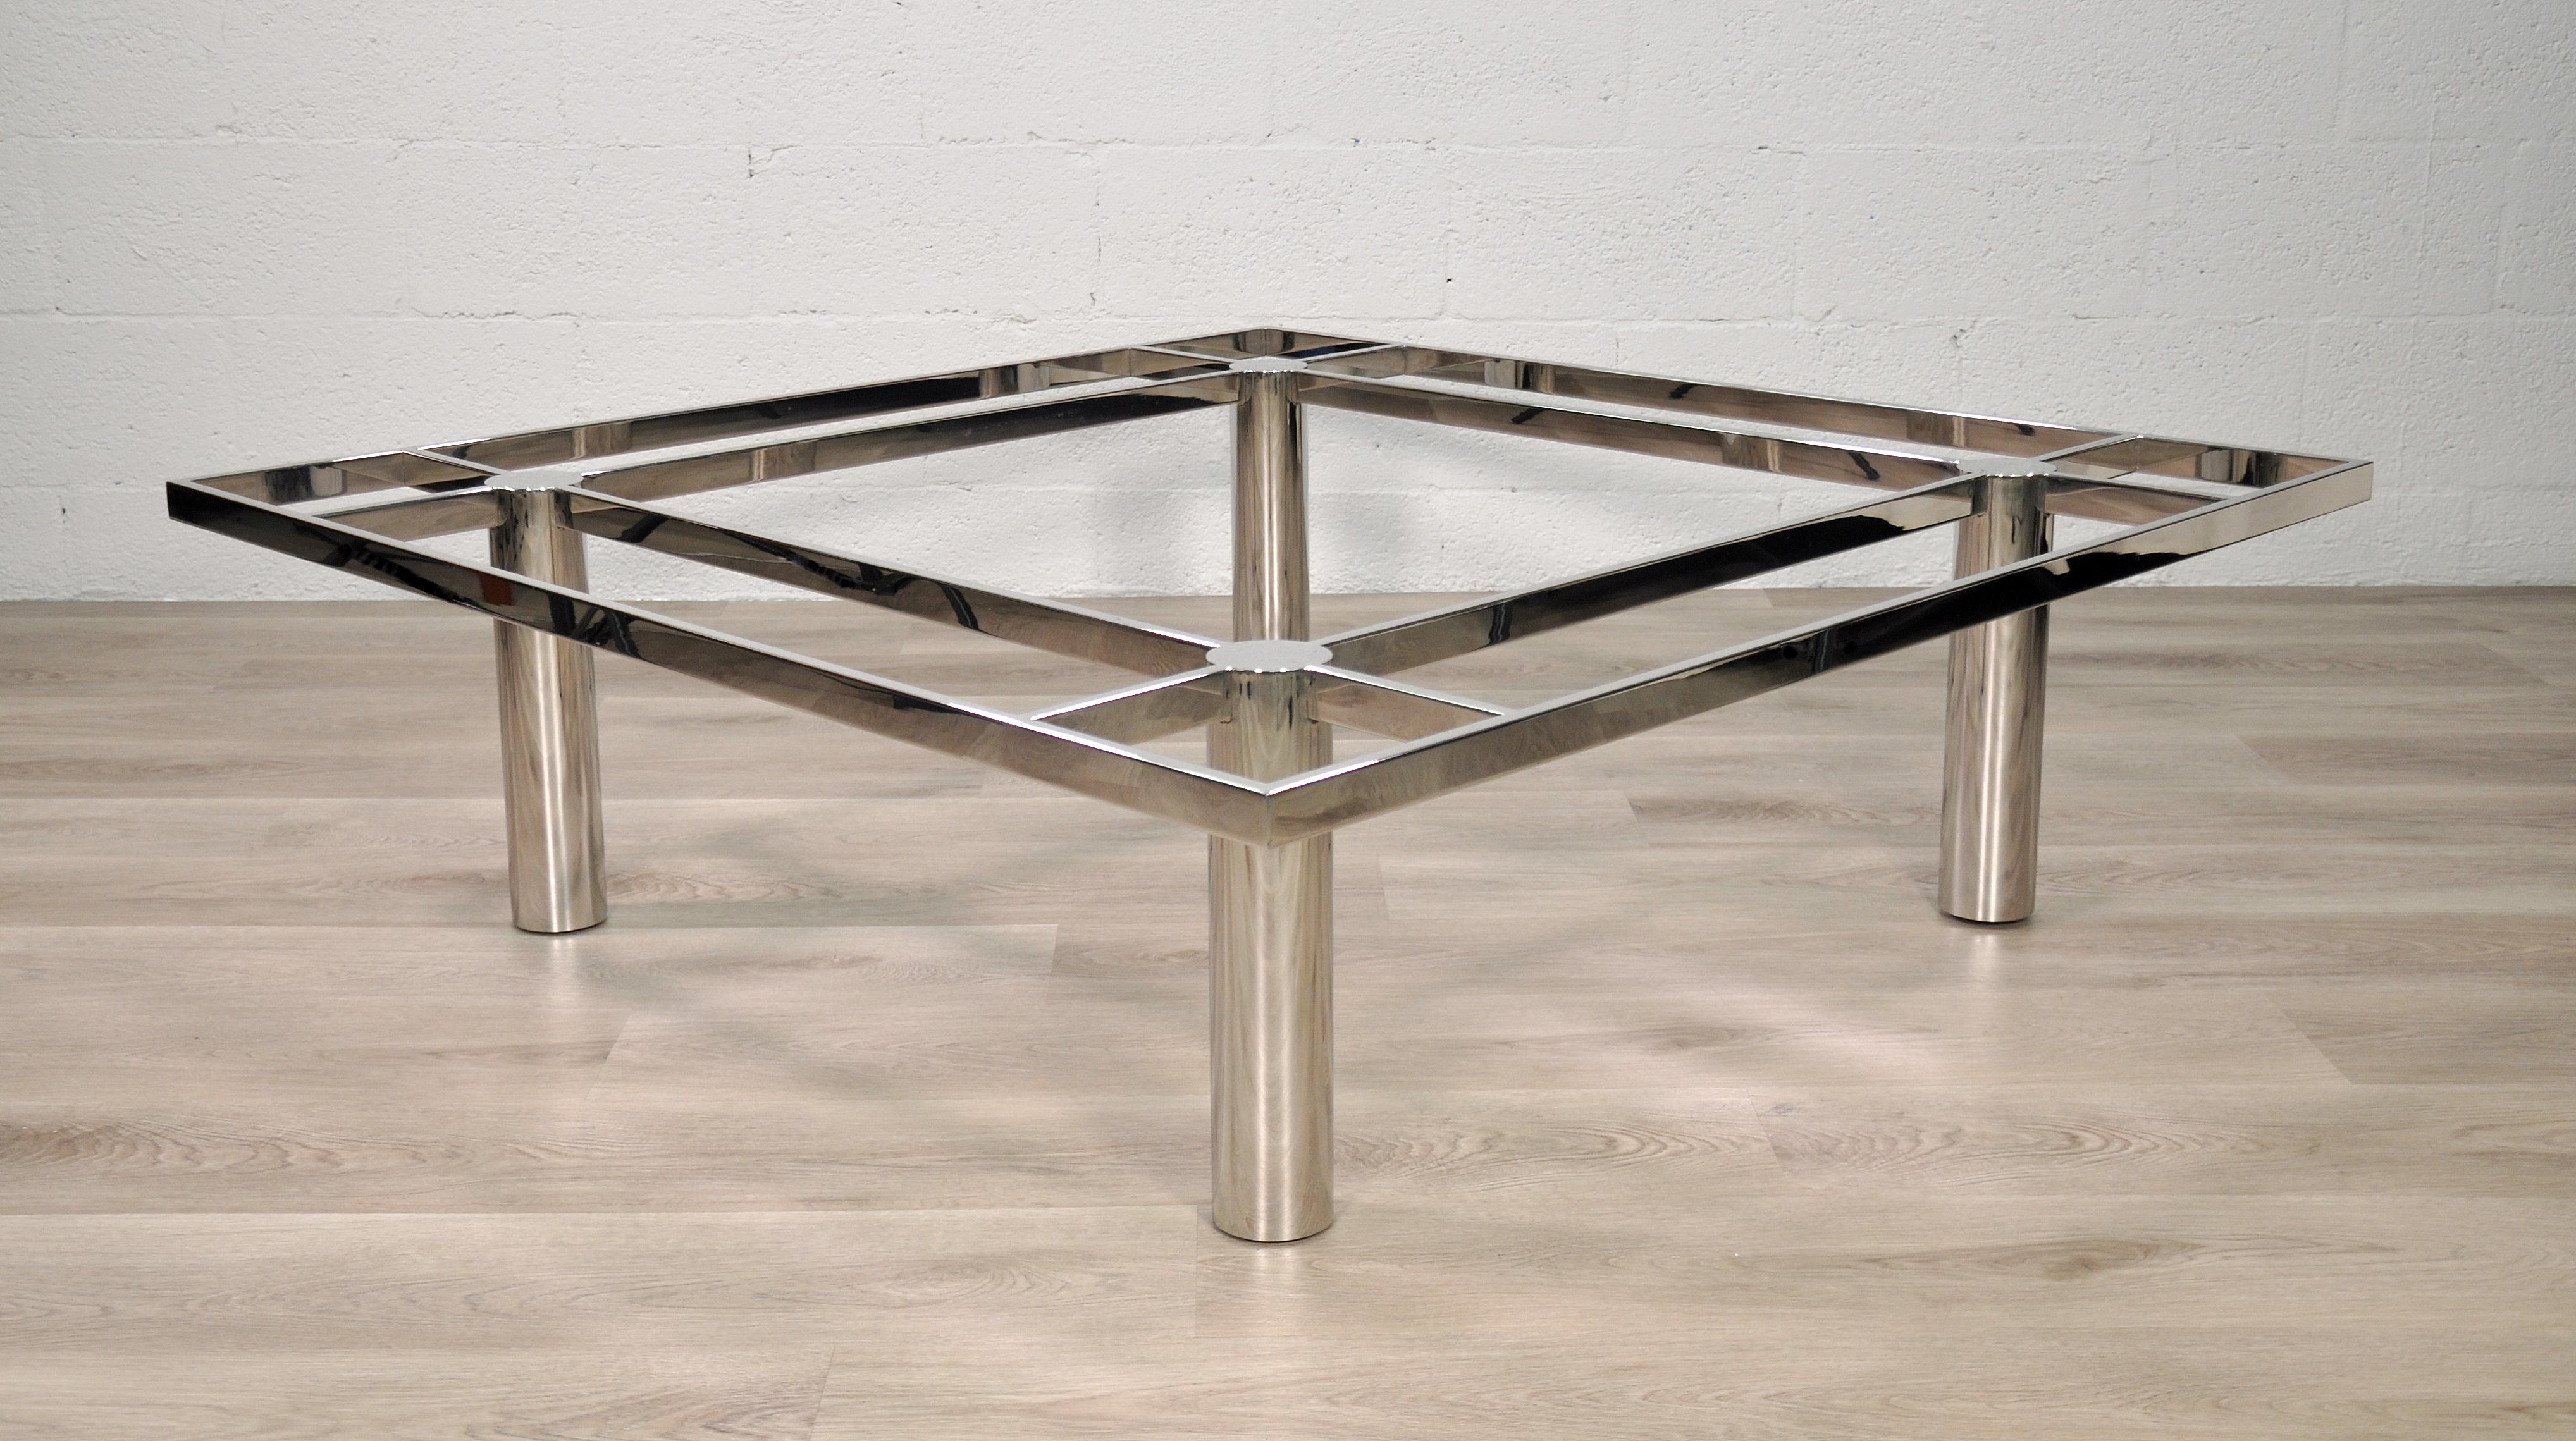 Available with your choice of new clear, smoked or bronzed glass, or just the base if you prefer to source your own glass, marble or stone top. Iconic Mid-Century Modern chrome-plated steel cocktail table designed by Afra & Tobia Scarpa for Knoll in